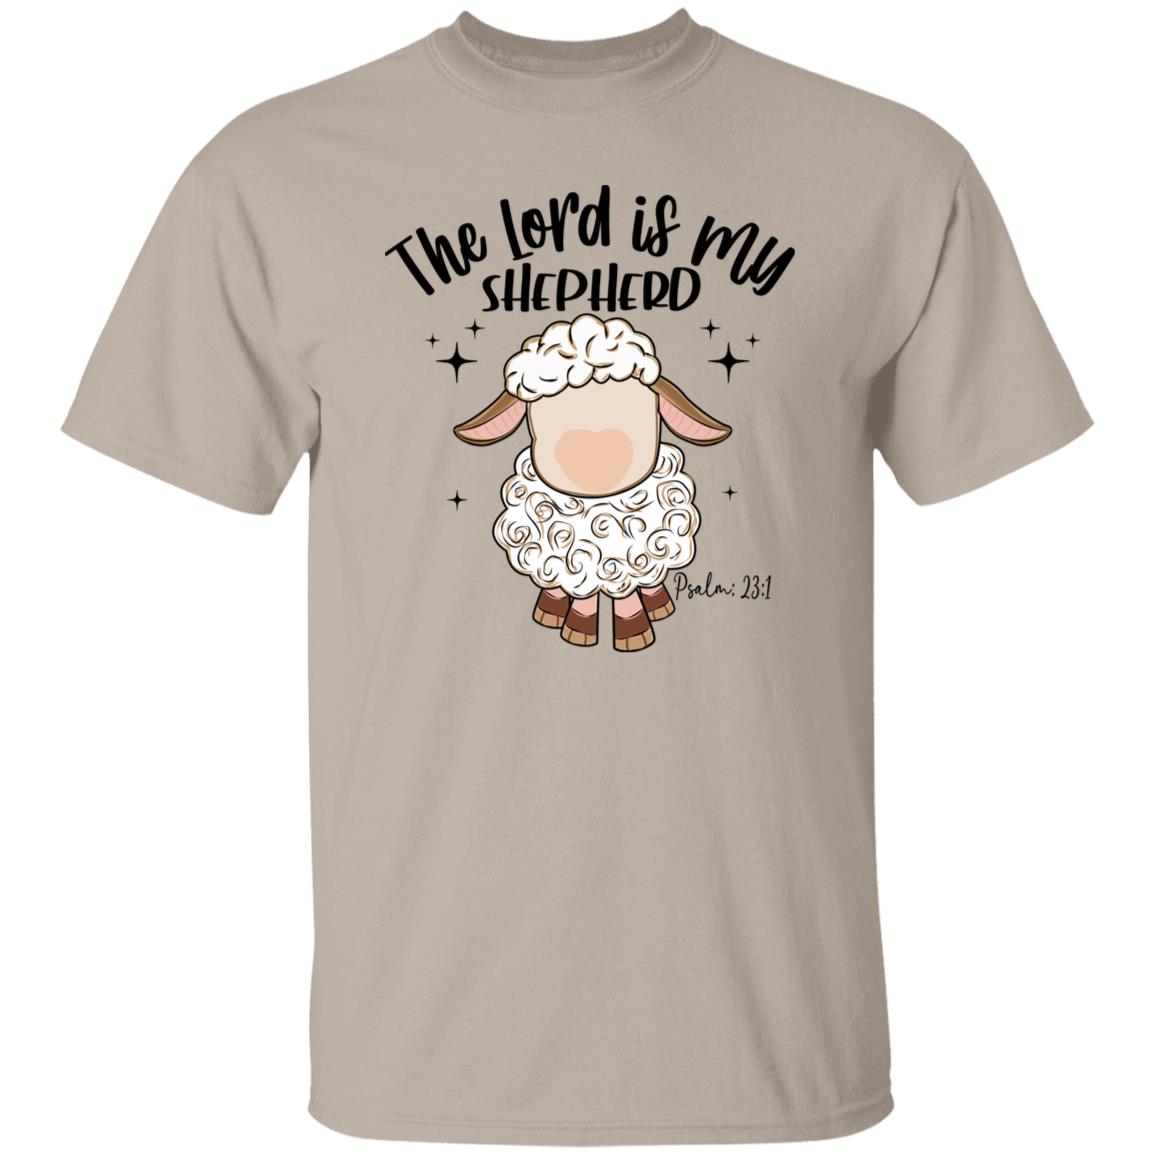 The Lord Is My Shepherd 5.3 oz. T-Shirt